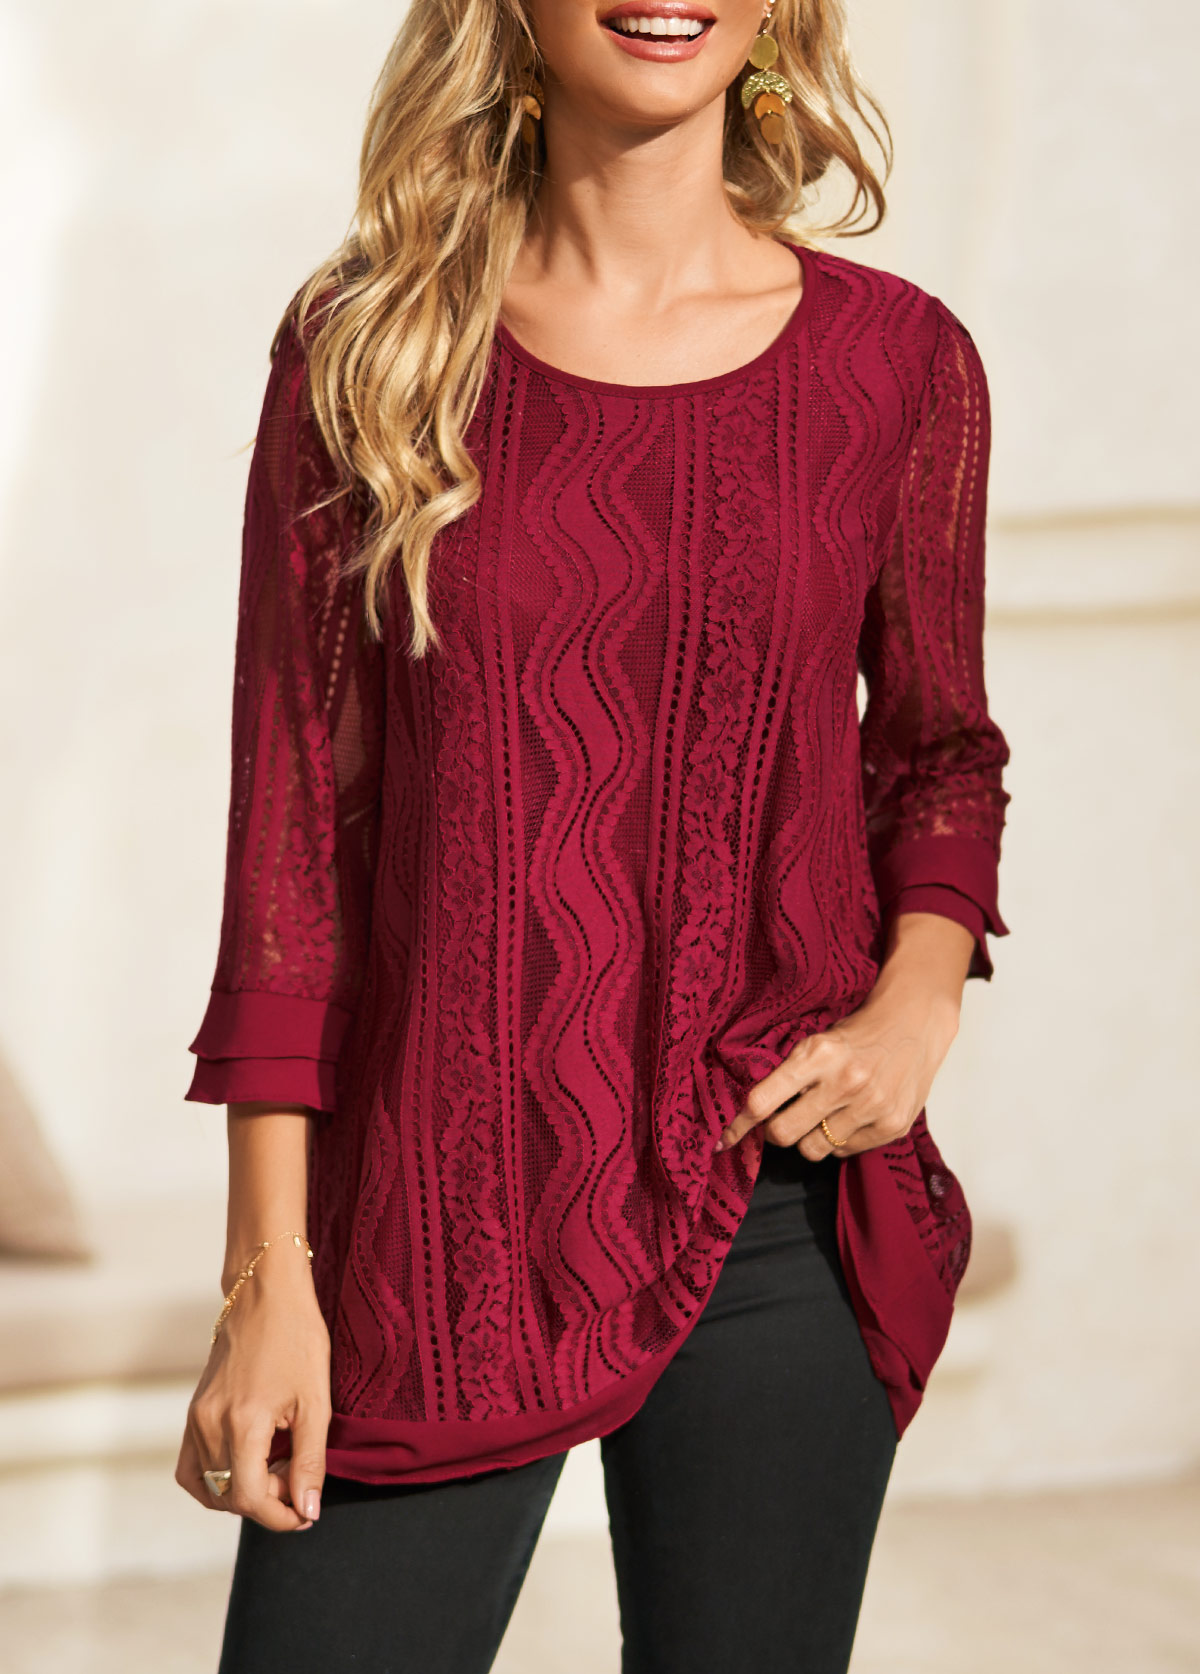 Lace Stitching 3/4 Sleeve Wine Red Blouse